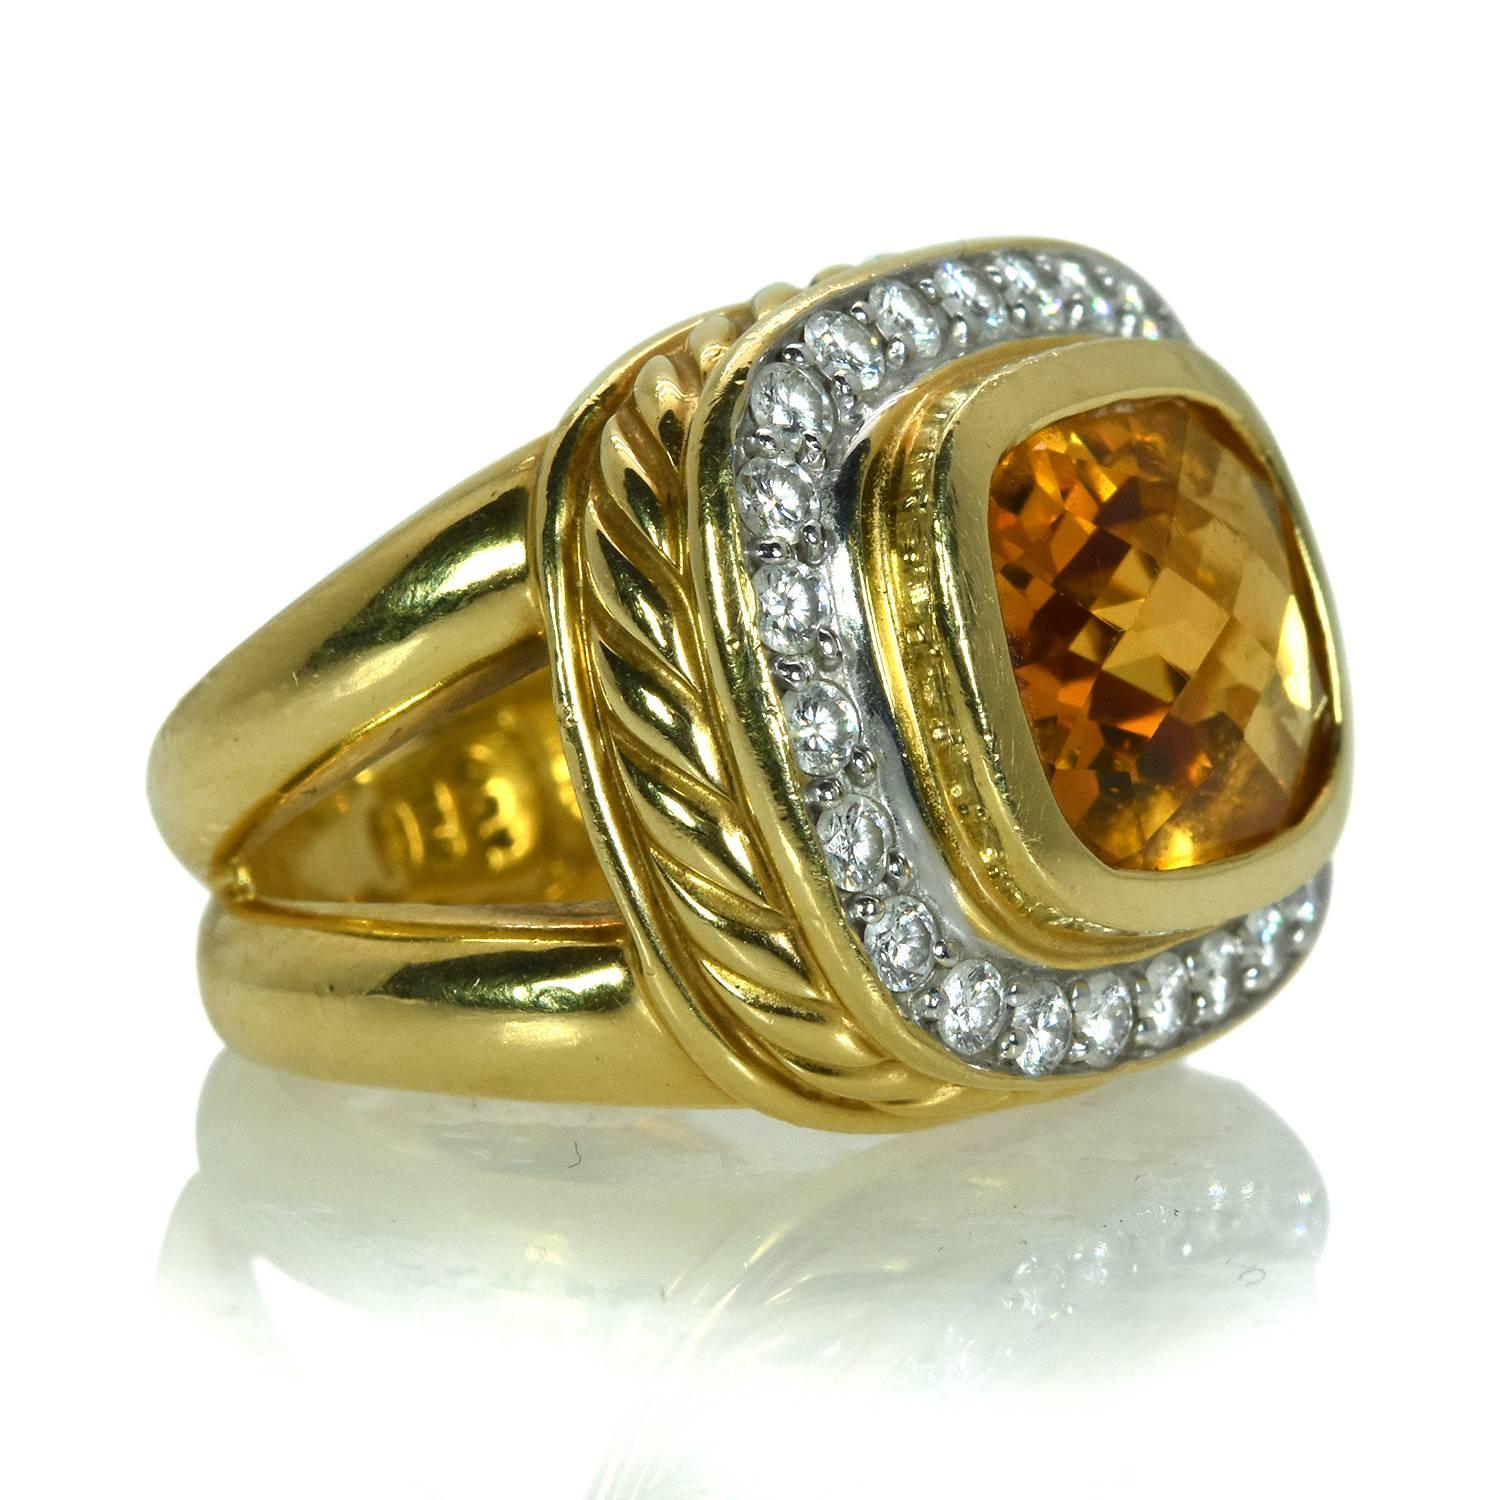 A Citrine and Diamond Ring by iconic American designer David Yurman, featuring 24 round brilliant cut diamonds totaling approximately 0.75 carats set in 18k Yellow Gold and signed by David Yurman. Size 5.